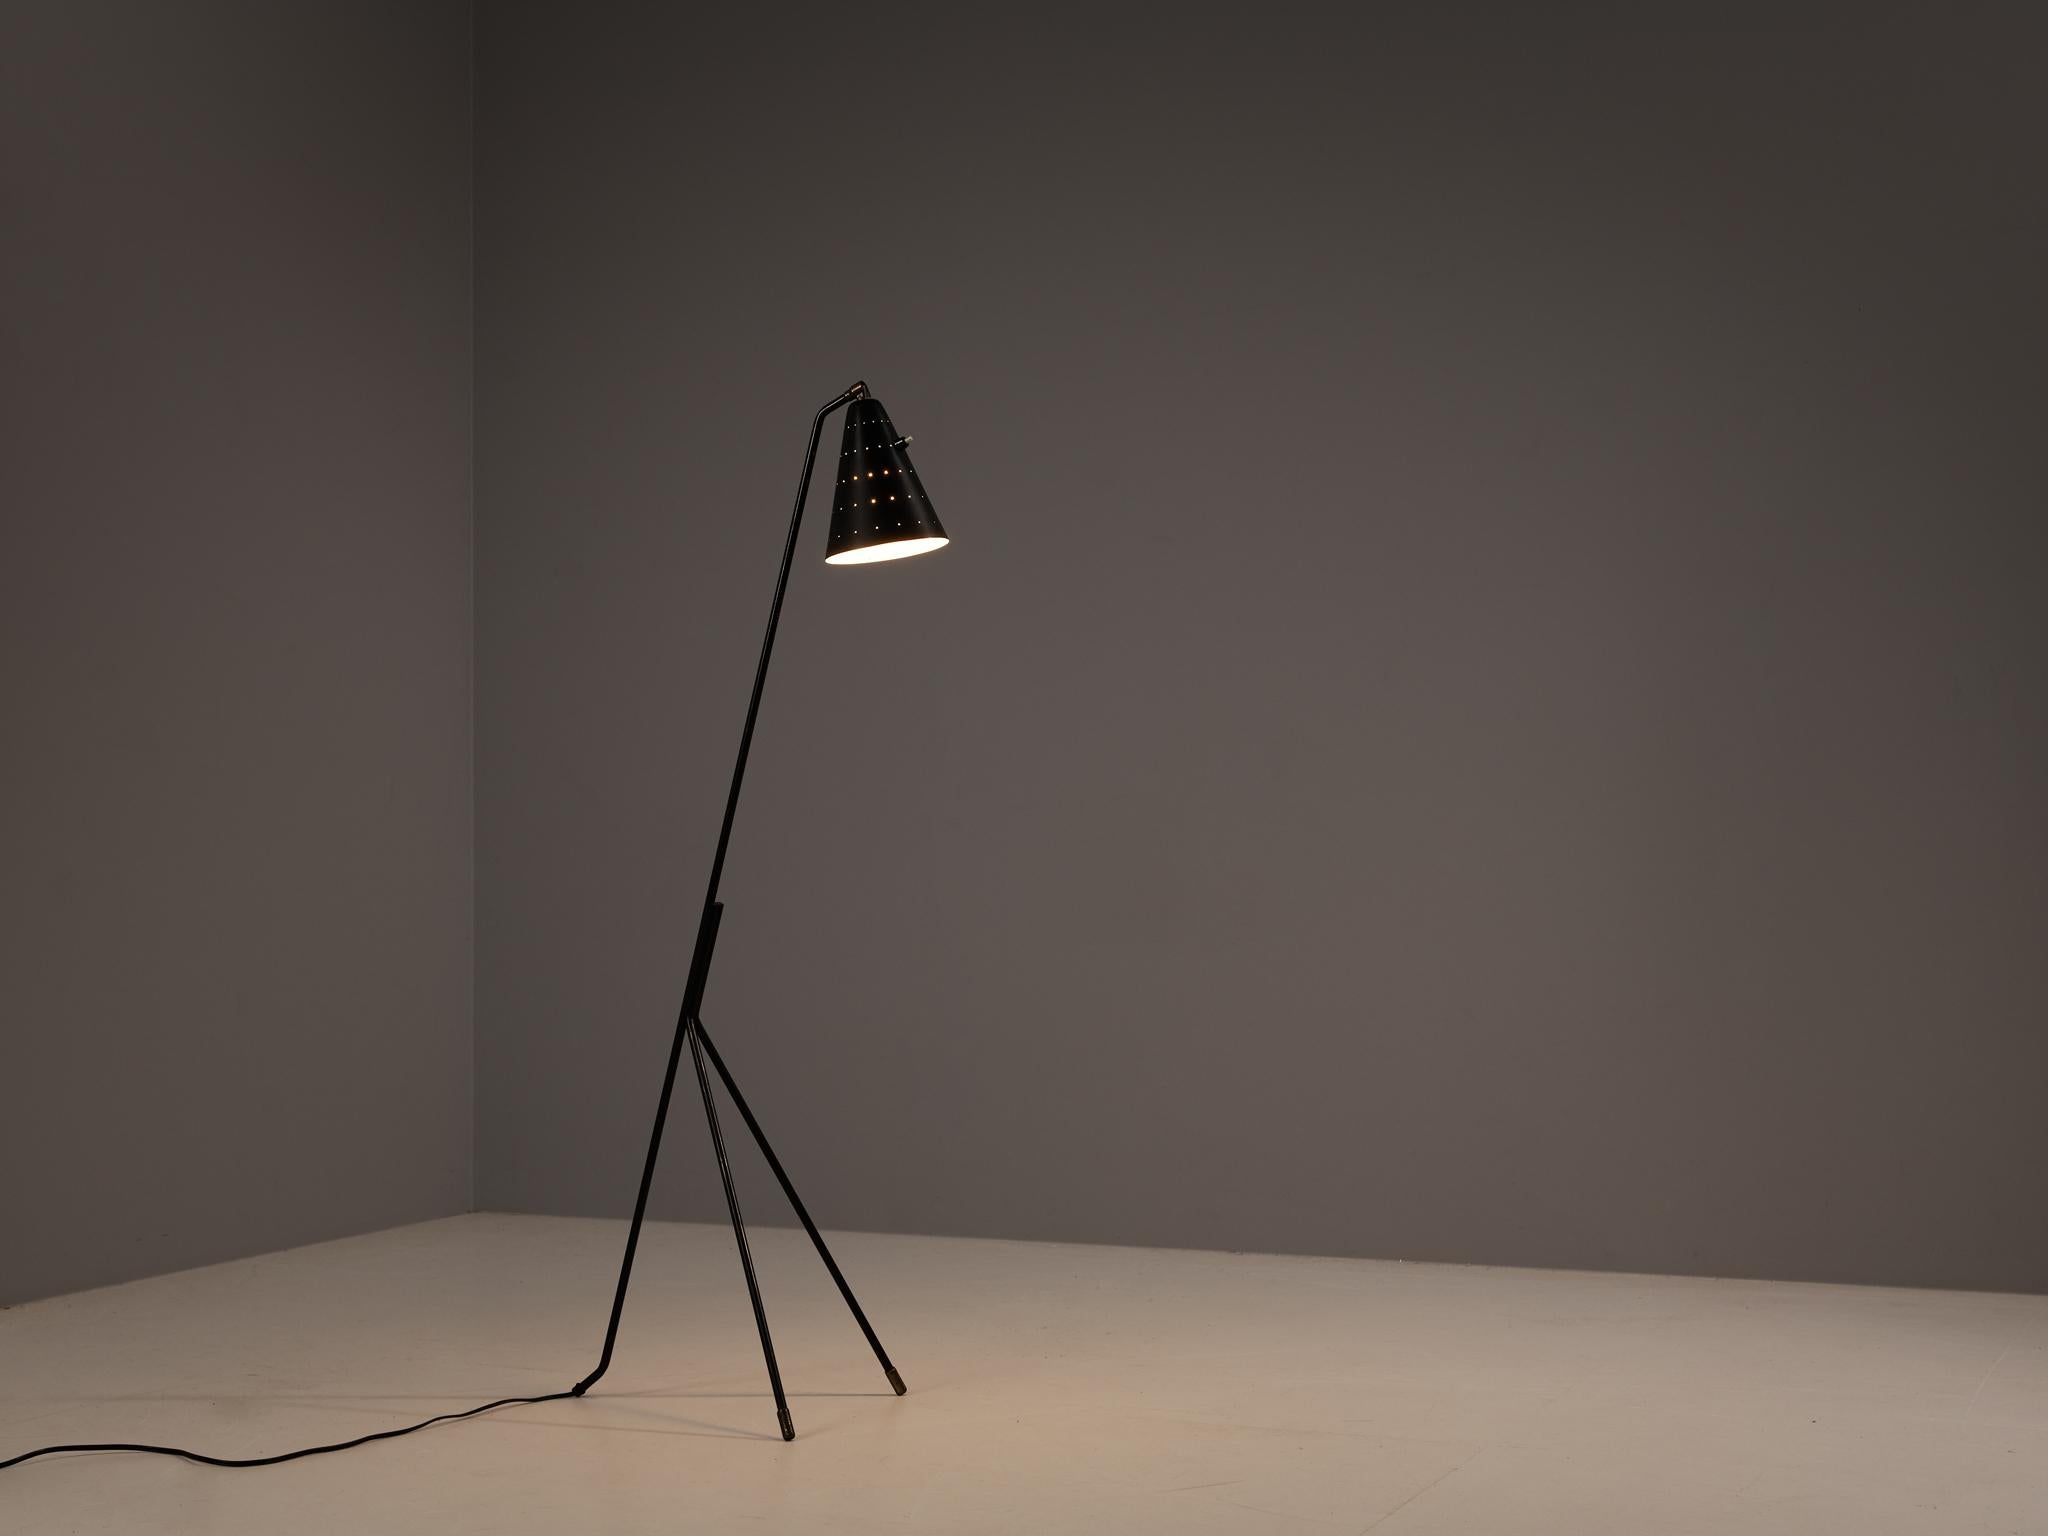 Svend Aage Holm Sørensen for Holm Sørensen & Co, floor lamp, coated aluminum, coated steel, brass, Denmark, 1950

This elegant floor lamps stands on a well-proportioned tripod base from which a thin stem arises in a diagonal manner. The